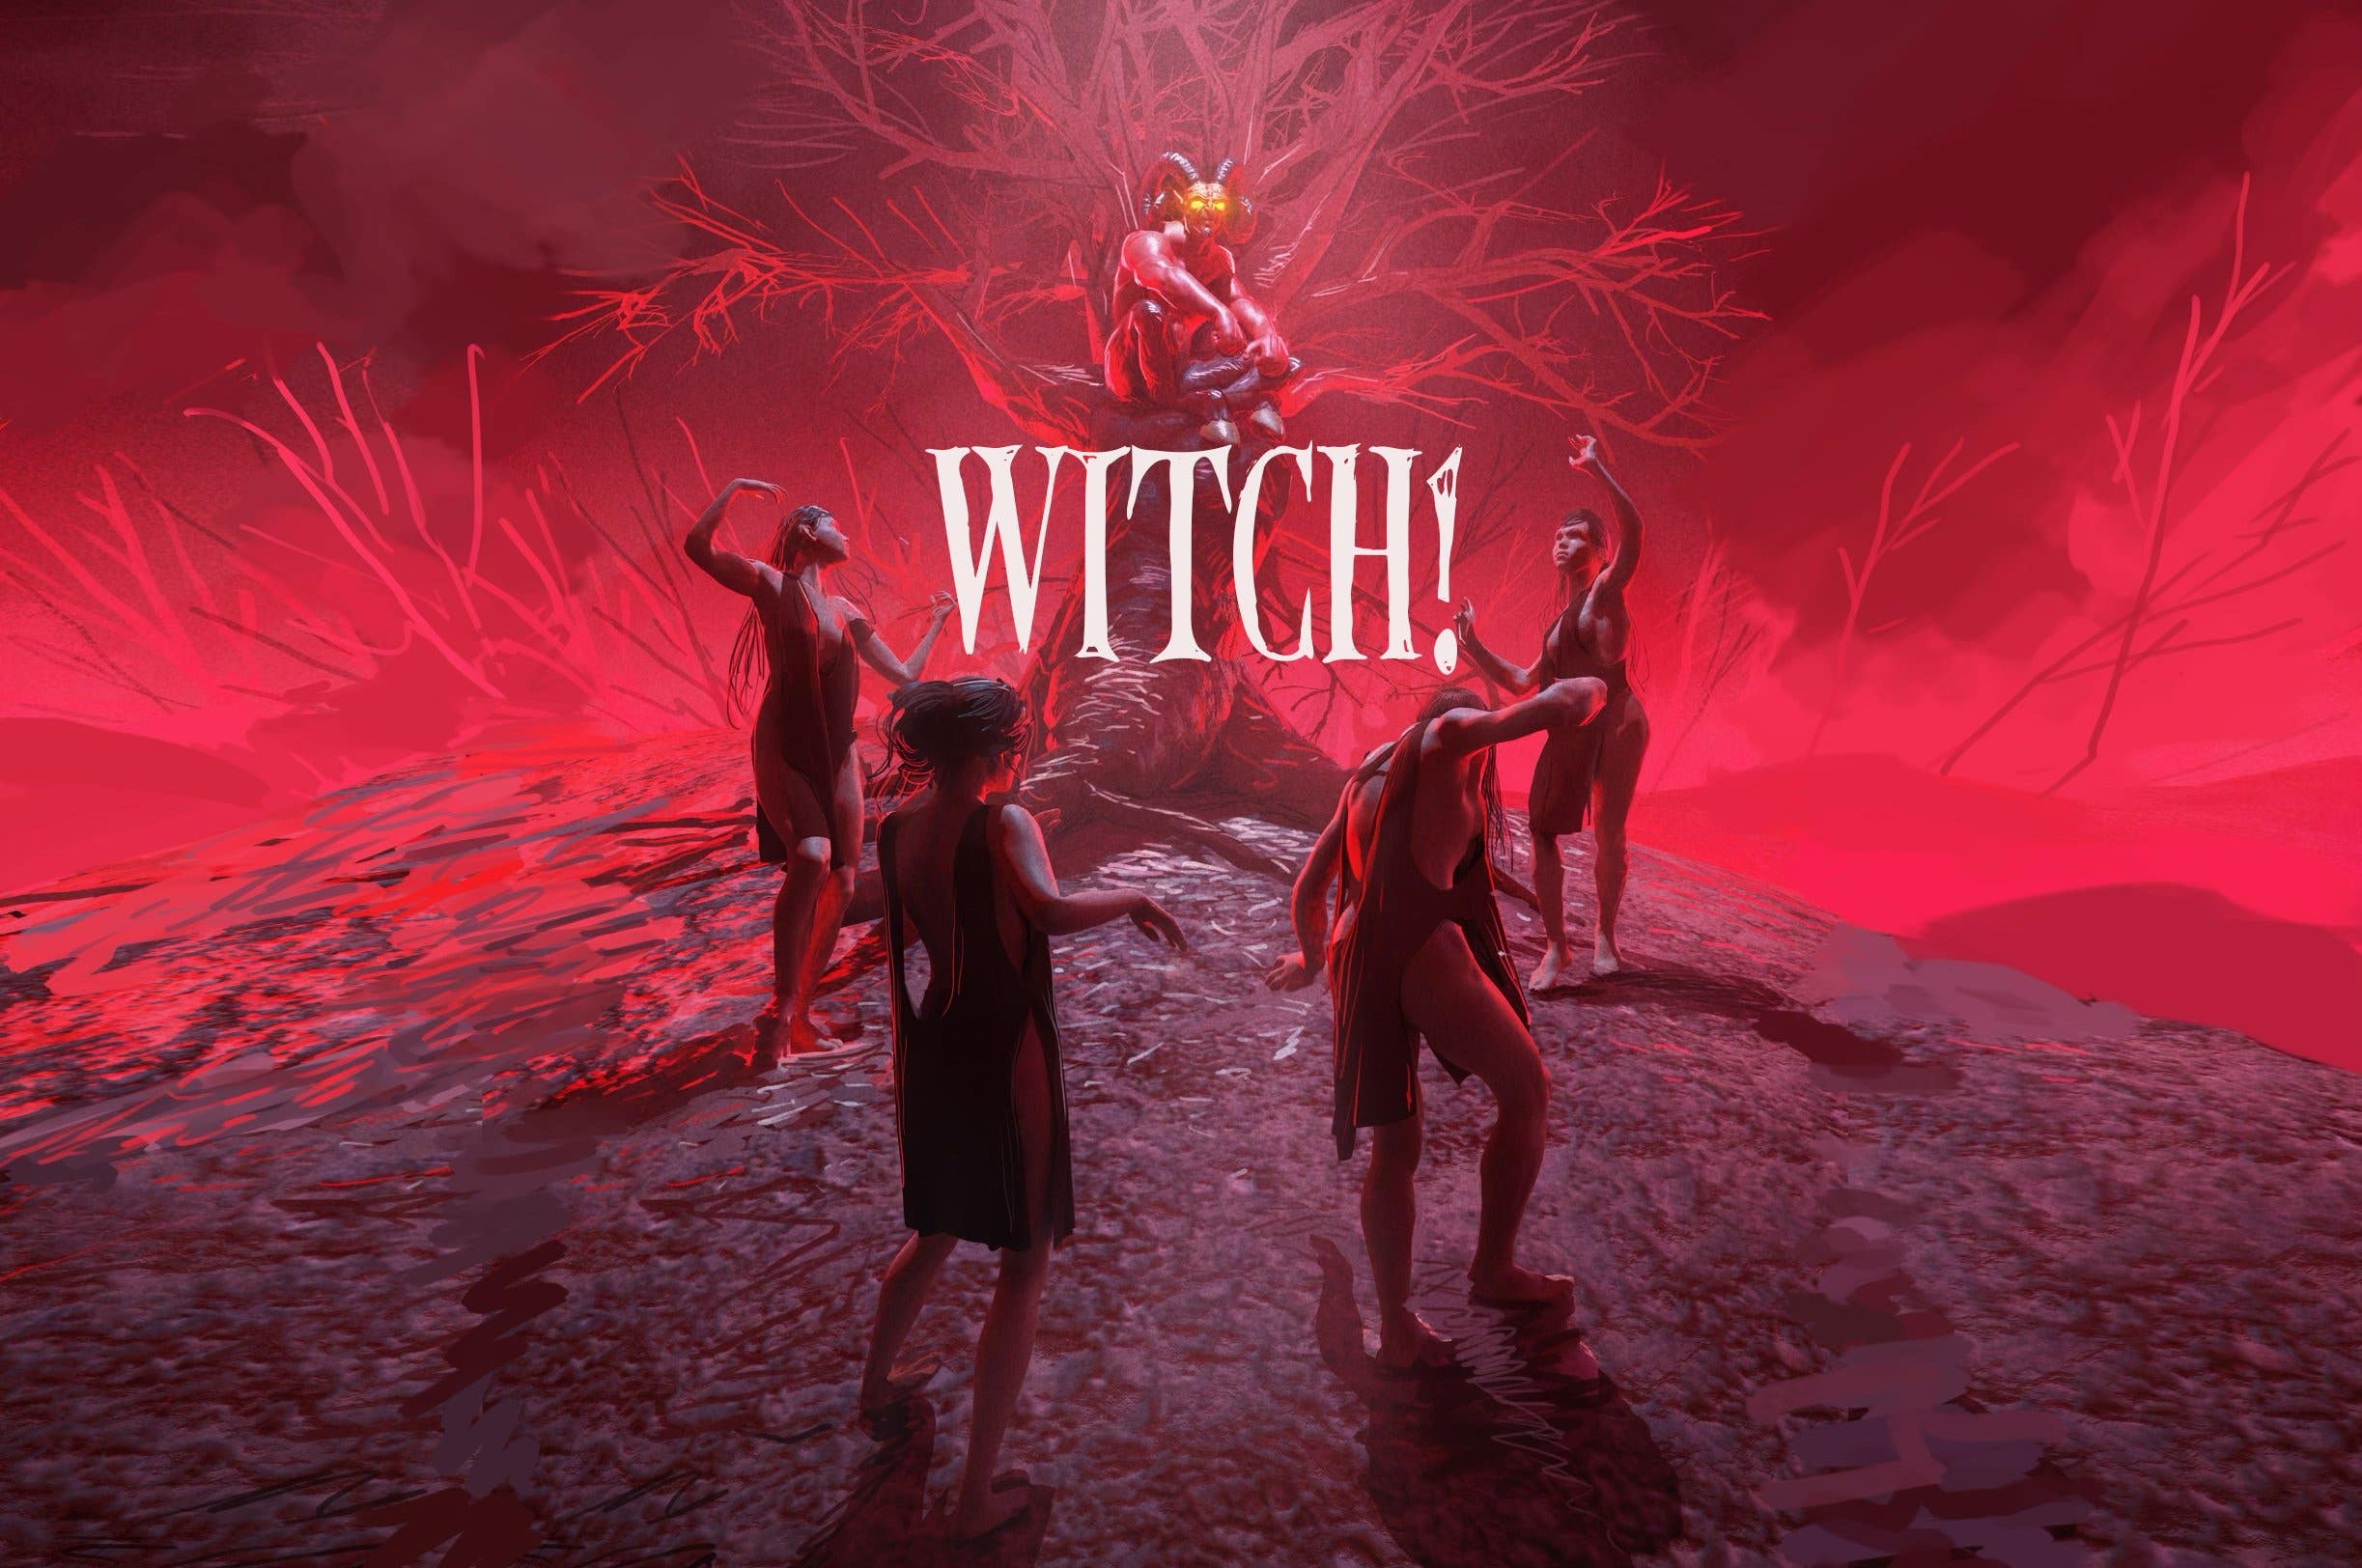 Downtown Repertory Theater "WITCH!"